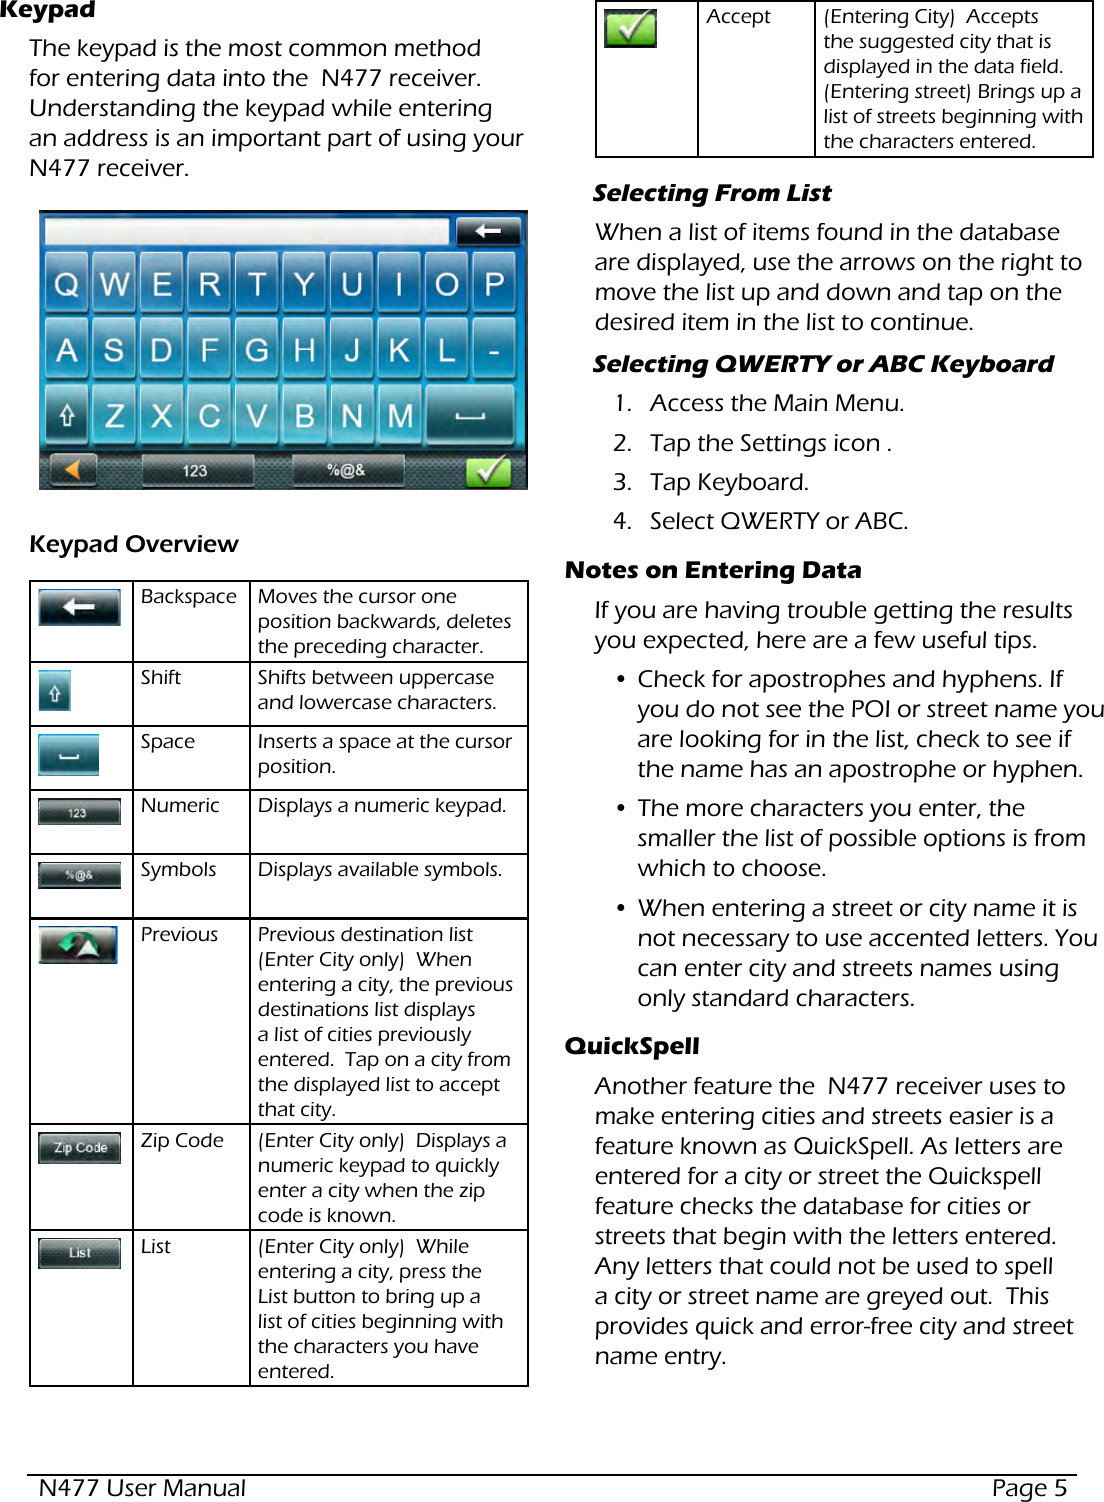 N477 User Manual  Page 5KeypadThe keypad is the most common method for entering data into the  N477 receiver.   Understanding the keypad while entering an address is an important part of using your  N477 receiver. Keypad Overview Backspace Moves the cursor one position backwards, deletes the preceding character.Shift Shifts between uppercase and lowercase characters.Space Inserts a space at the cursor position.Numeric Displays a numeric keypad.Symbols Displays available symbols.Previous Previous destination list  (Enter City only)  When entering a city, the previous destinations list displays a list of cities previously entered.  Tap on a city from the displayed list to accept that city.Zip Code (Enter City only)  Displays a numeric keypad to quickly enter a city when the zip code is known.List (Enter City only)  While entering a city, press the List button to bring up a list of cities beginning with the characters you have entered.Accept (Entering City)  Accepts the suggested city that is displayed in the data field.  (Entering street) Brings up a list of streets beginning with the characters entered.Selecting From ListWhen a list of items found in the database are displayed, use the arrows on the right to move the list up and down and tap on the desired item in the list to continue.Selecting QWERTY or ABC Keyboard1.  Access the Main Menu.2.  Tap the Settings icon .3.  Tap Keyboard.4.  Select QWERTY or ABC.Notes on Entering DataIf you are having trouble getting the results you expected, here are a few useful tips.• Check for apostrophes and hyphens. If you do not see the POI or street name you are looking for in the list, check to see if the name has an apostrophe or hyphen.• The more characters you enter, the smaller the list of possible options is from which to choose.• When entering a street or city name it is not necessary to use accented letters. You can enter city and streets names using only standard characters.QuickSpellAnother feature the  N477 receiver uses to make entering cities and streets easier is a feature known as QuickSpell. As letters are entered for a city or street the Quickspell feature checks the database for cities or streets that begin with the letters entered.  Any letters that could not be used to spell a city or street name are greyed out.  This provides quick and error-free city and street name entry.